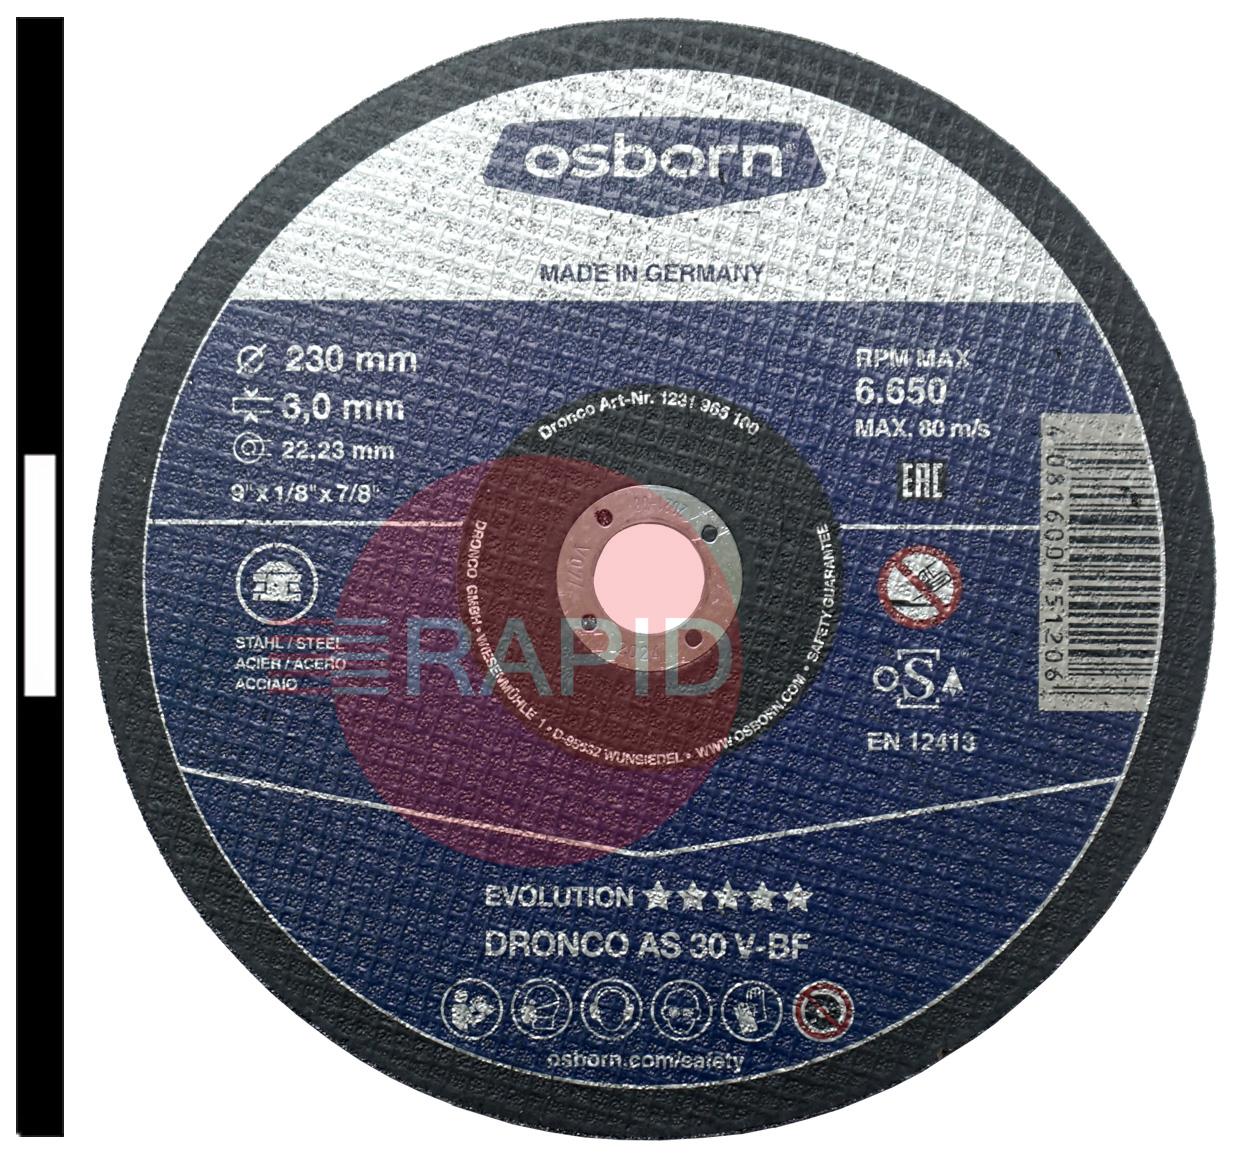 925MC  Dronco 230mm (9) Slitting Cutting Disc 3mm Thick. Grade AS 30 V Inox-BF For Steel.